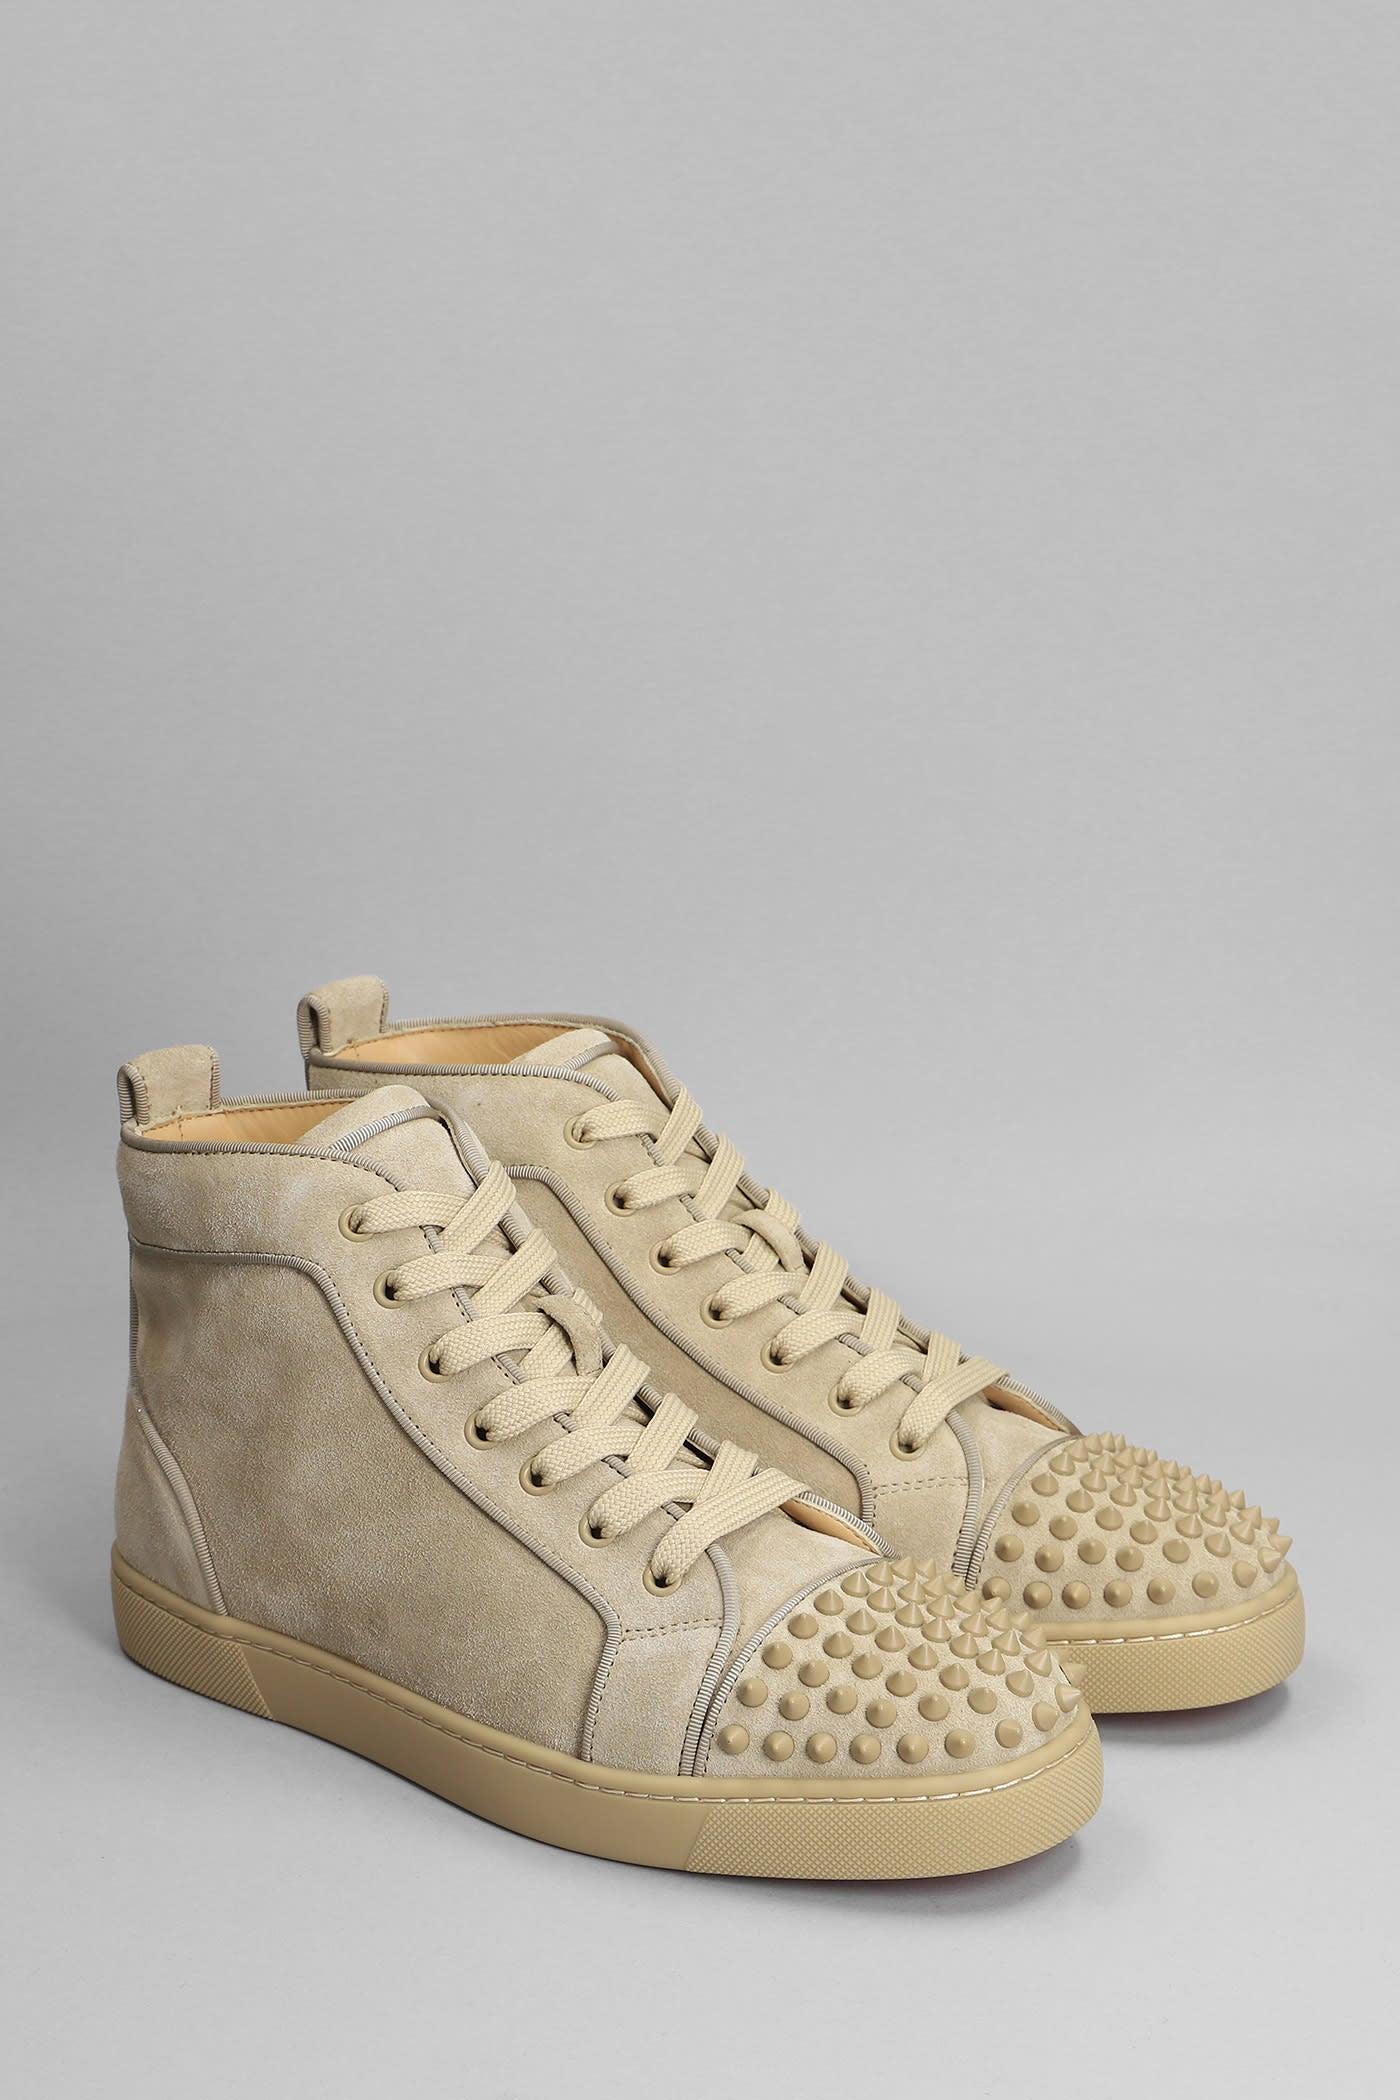 Christian Louboutin Beige Suede Louis Spikes High Top Sneakers